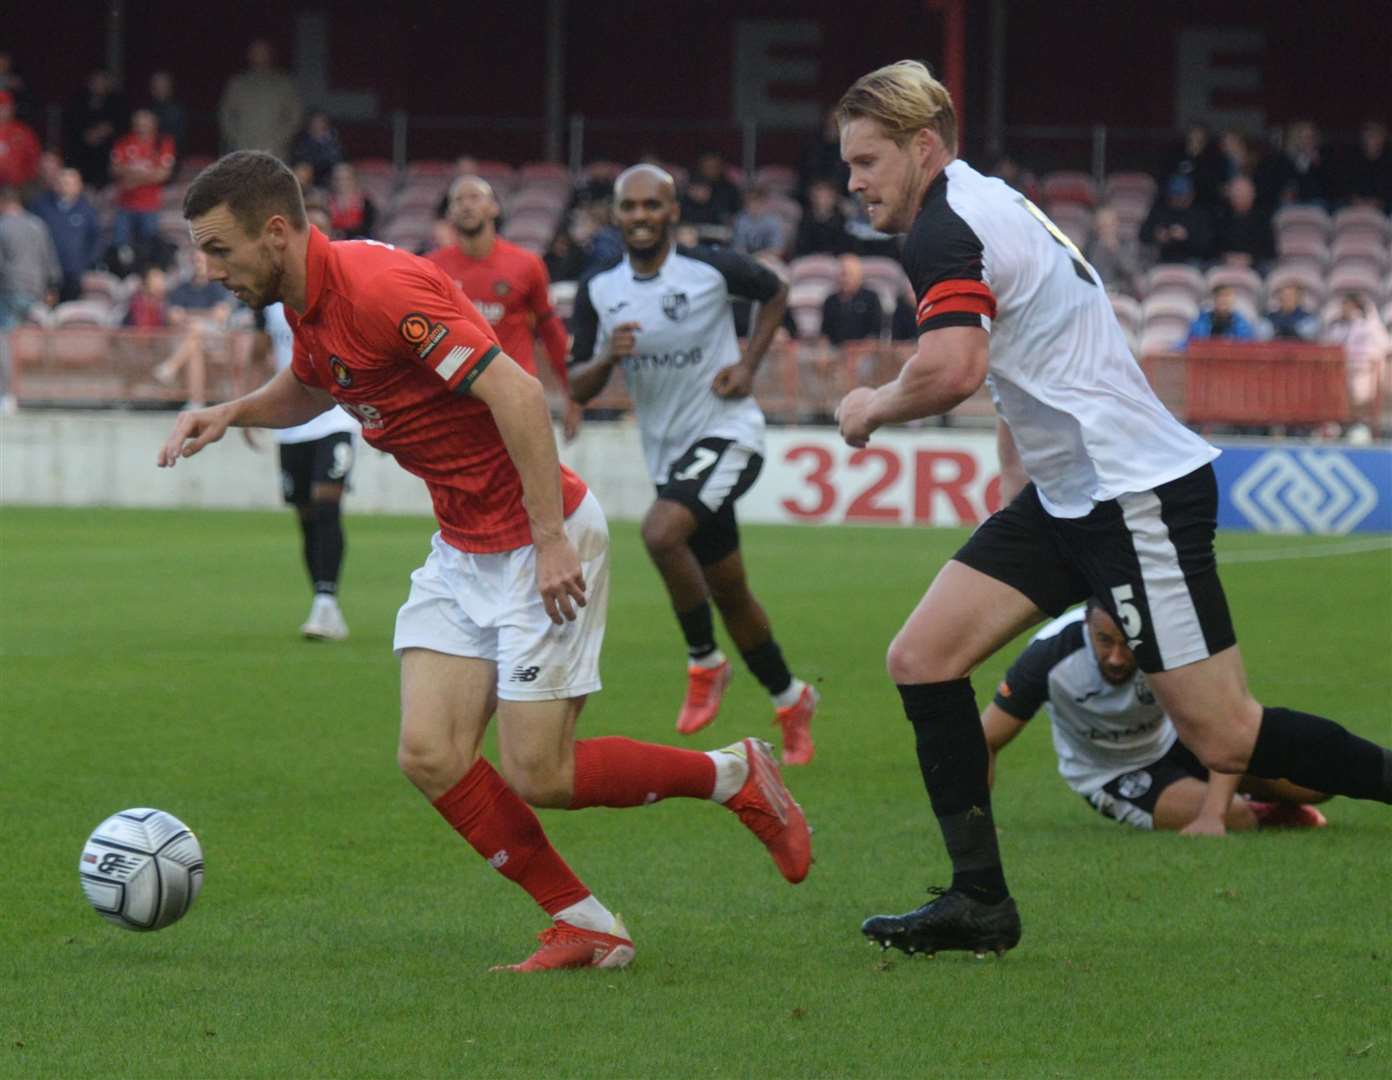 Ebbsfleet beat Hampton & Richmond 2-0 in the FA Cup fourth qualifying round Picture: Chris Davey